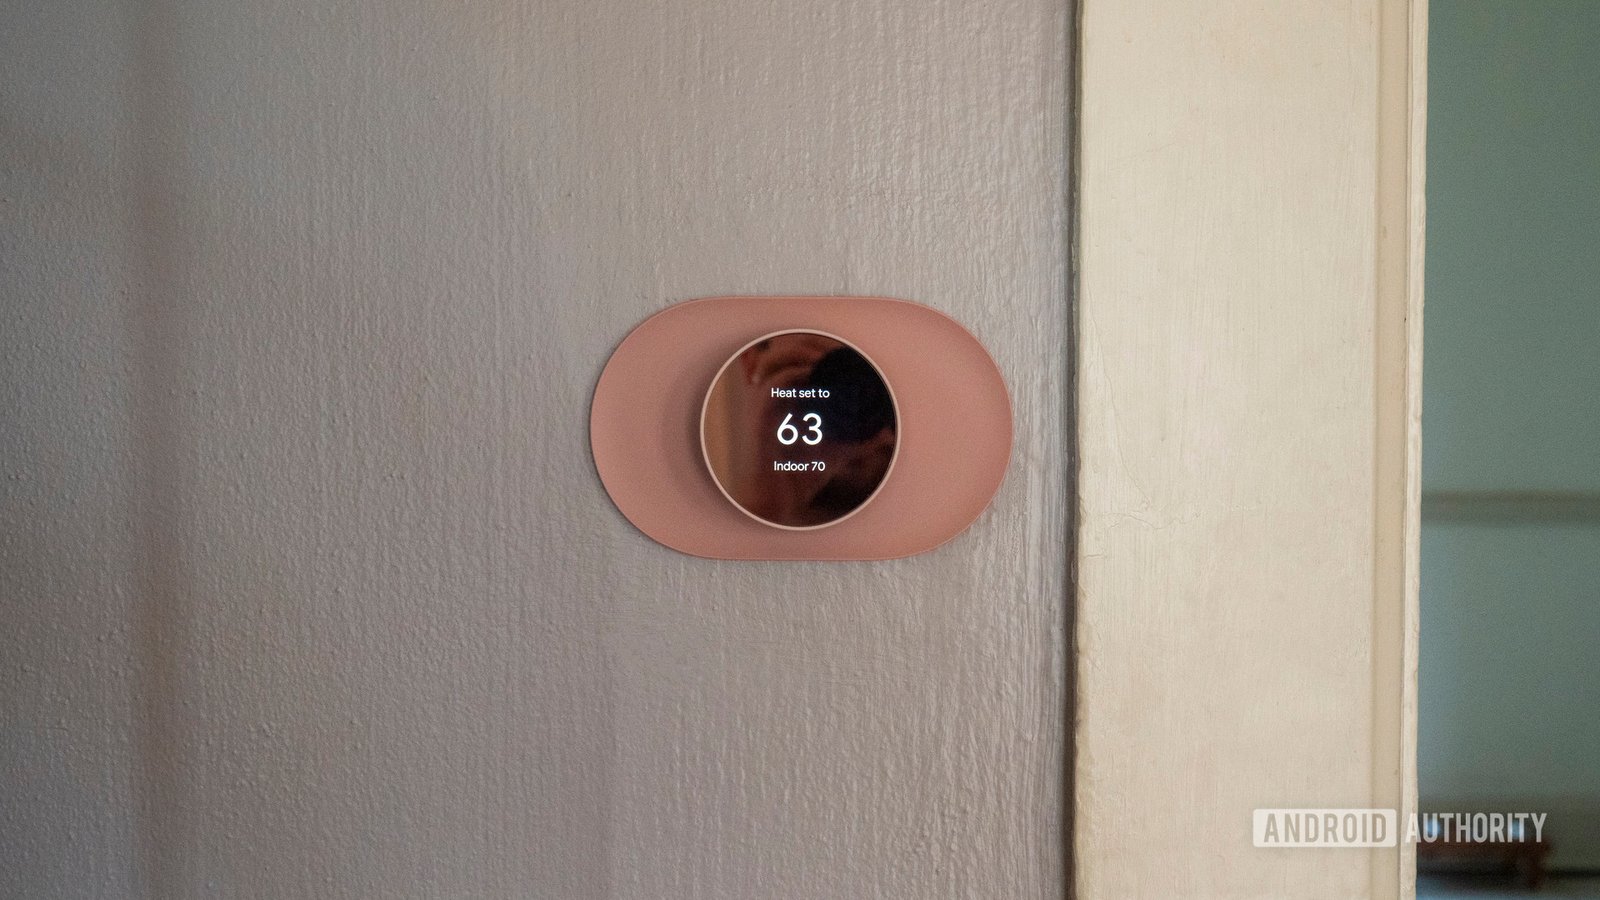 Is it a Nest Thermostat?